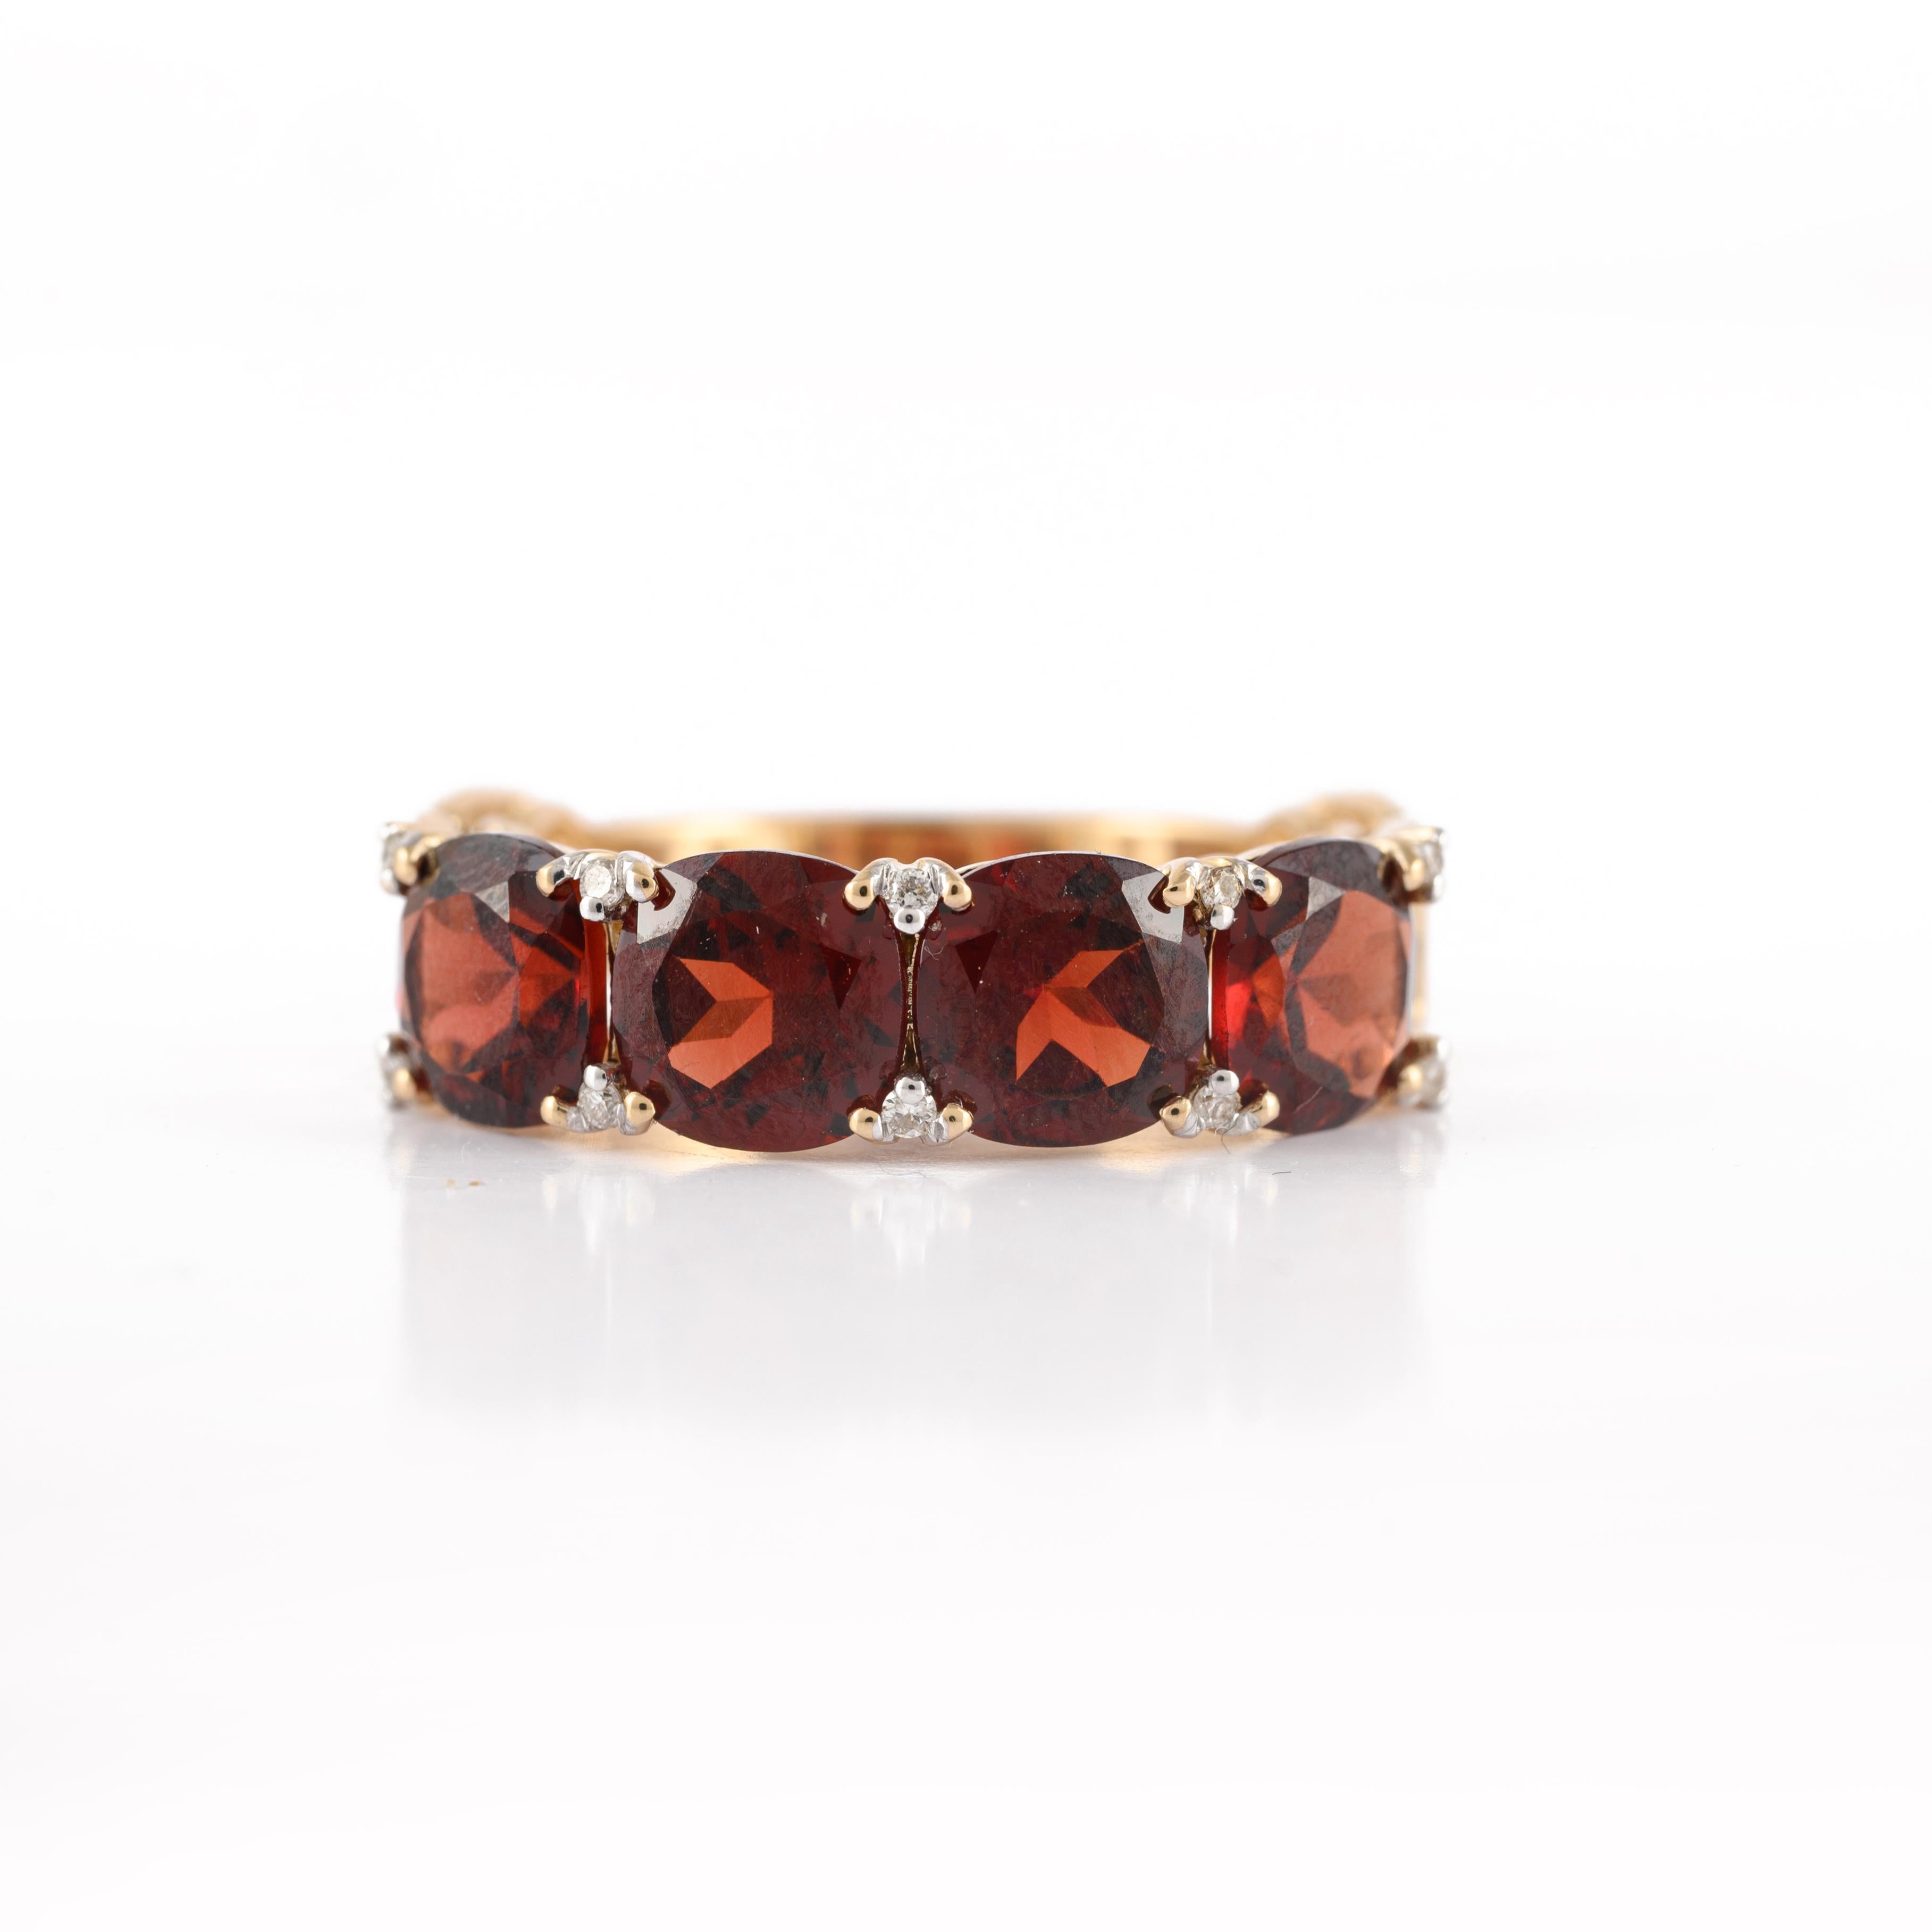 For Sale:  14k Solid Yellow Gold Natural 4.75 Carat Garnet Ring with Diamonds for Her 3